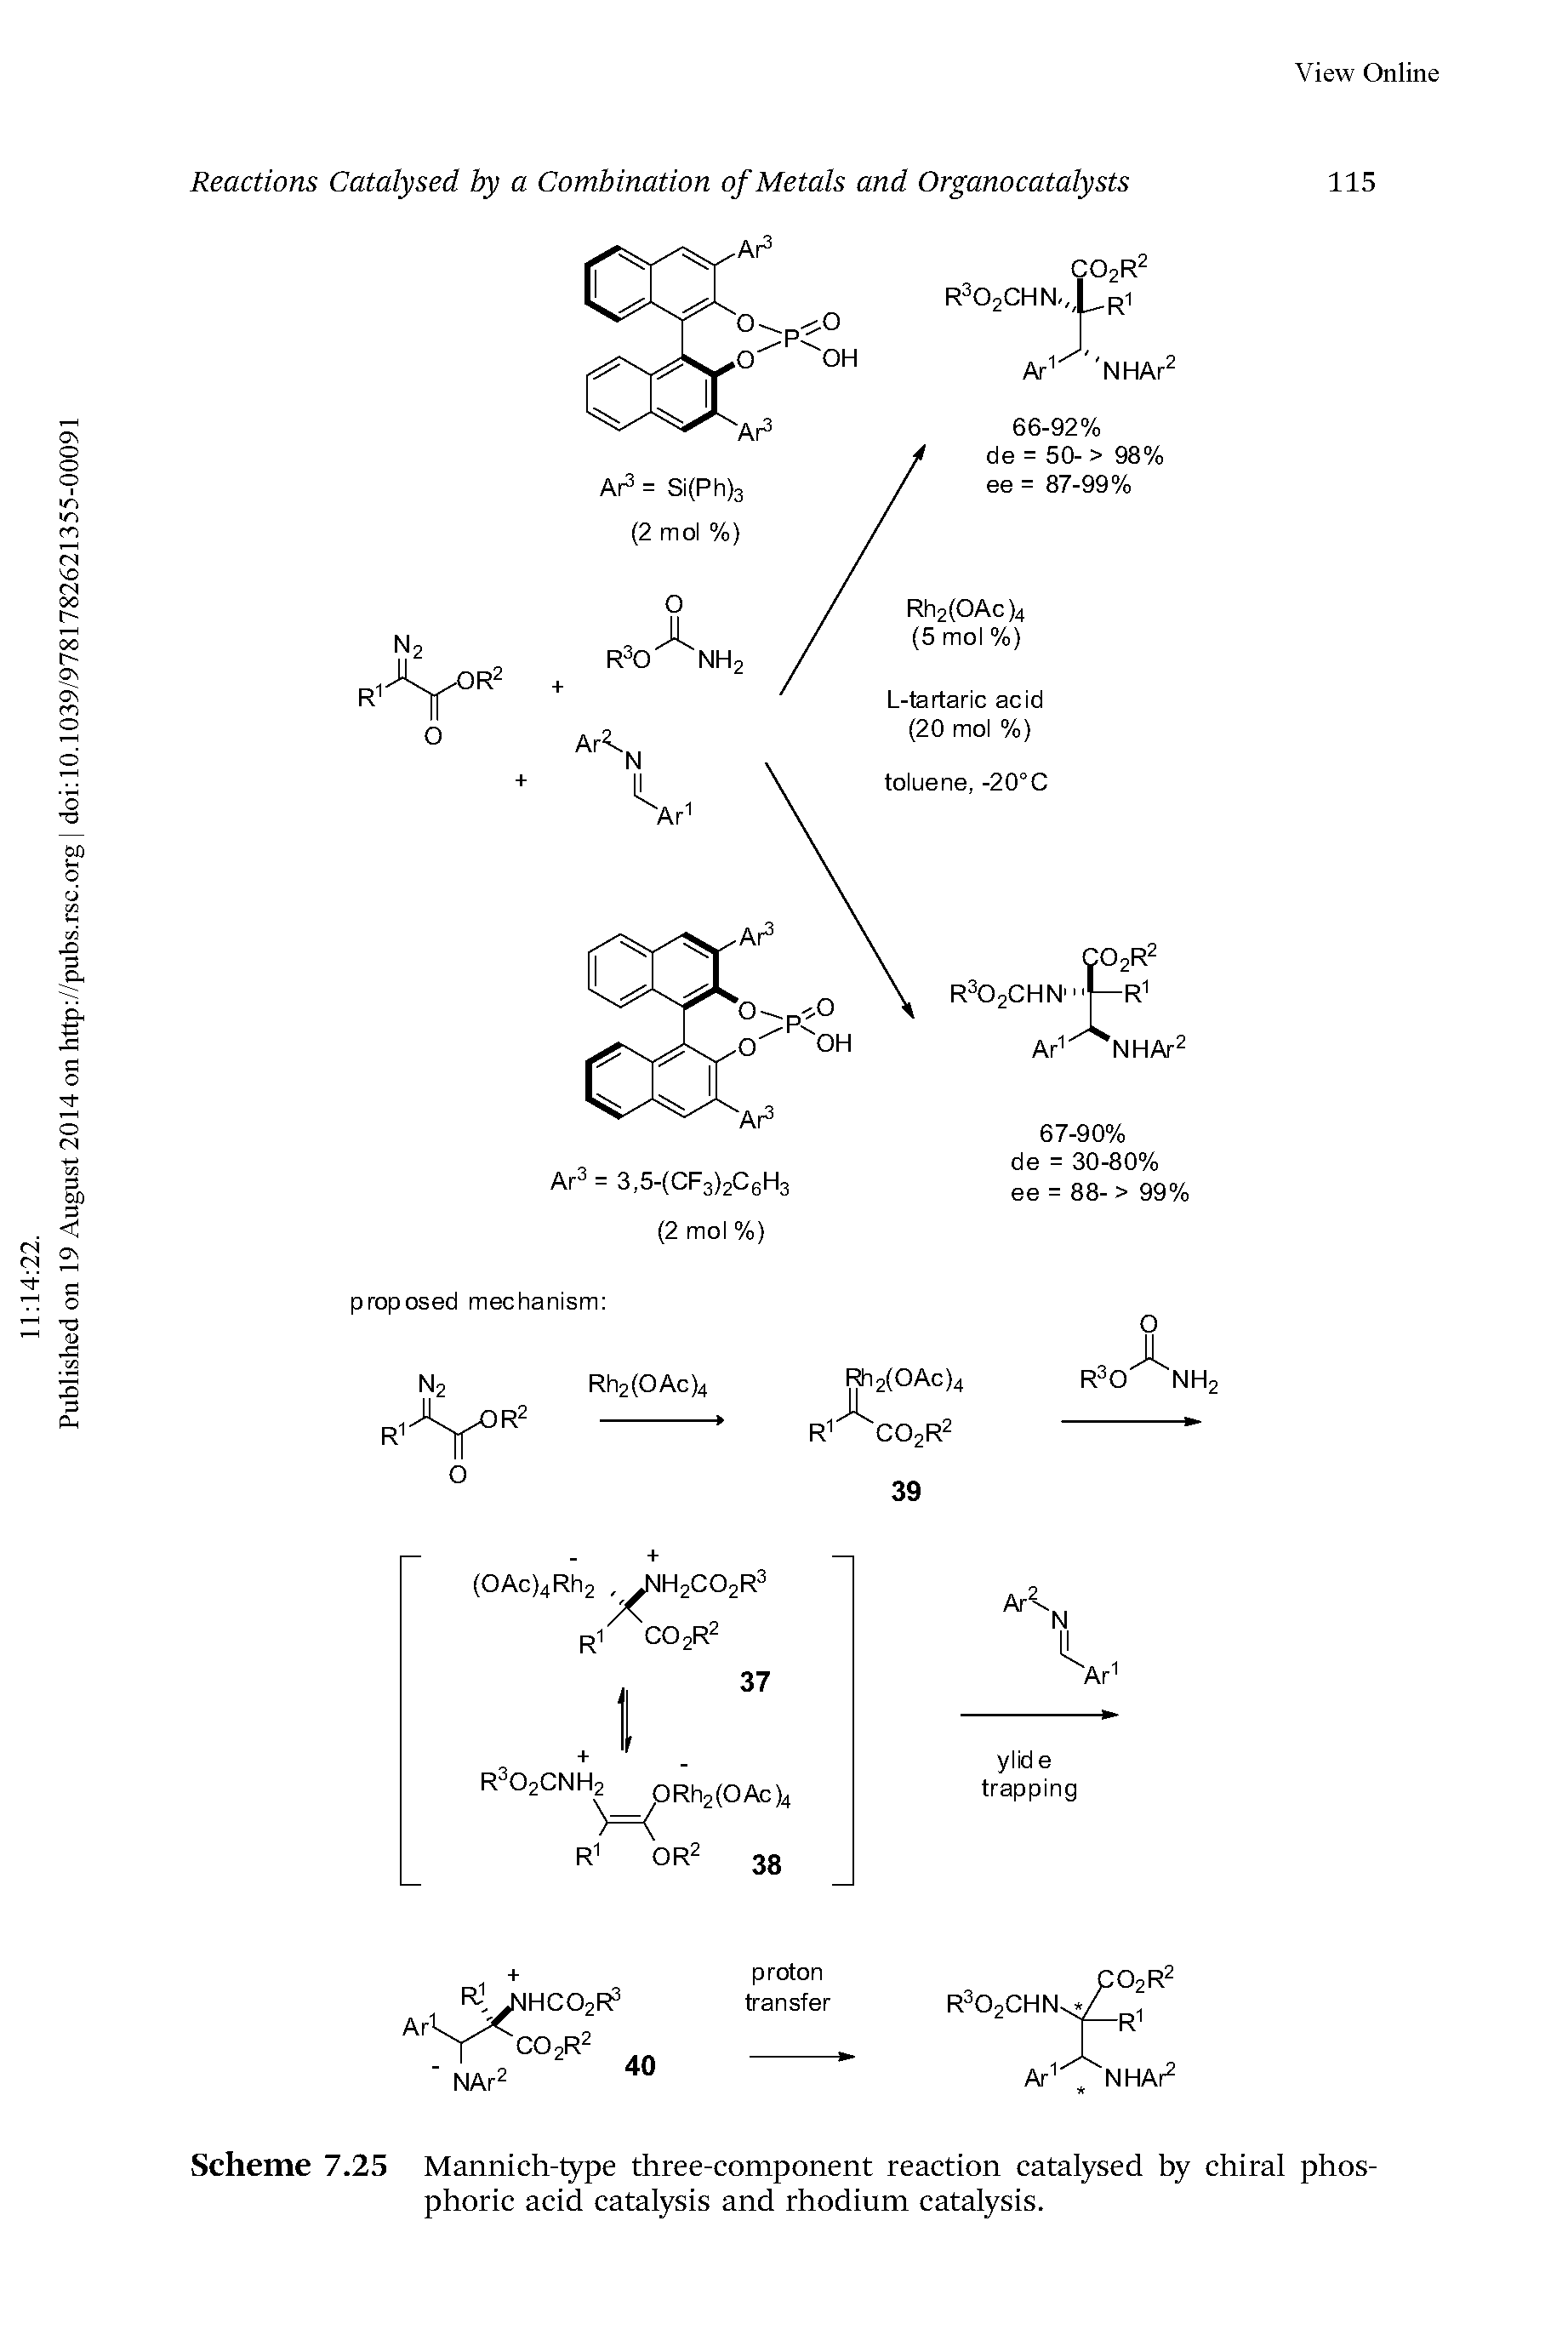 Scheme 7.25 Mannich-type three-component reaction catalysed by chiral phosphoric acid catalysis and rhodium catalysis.